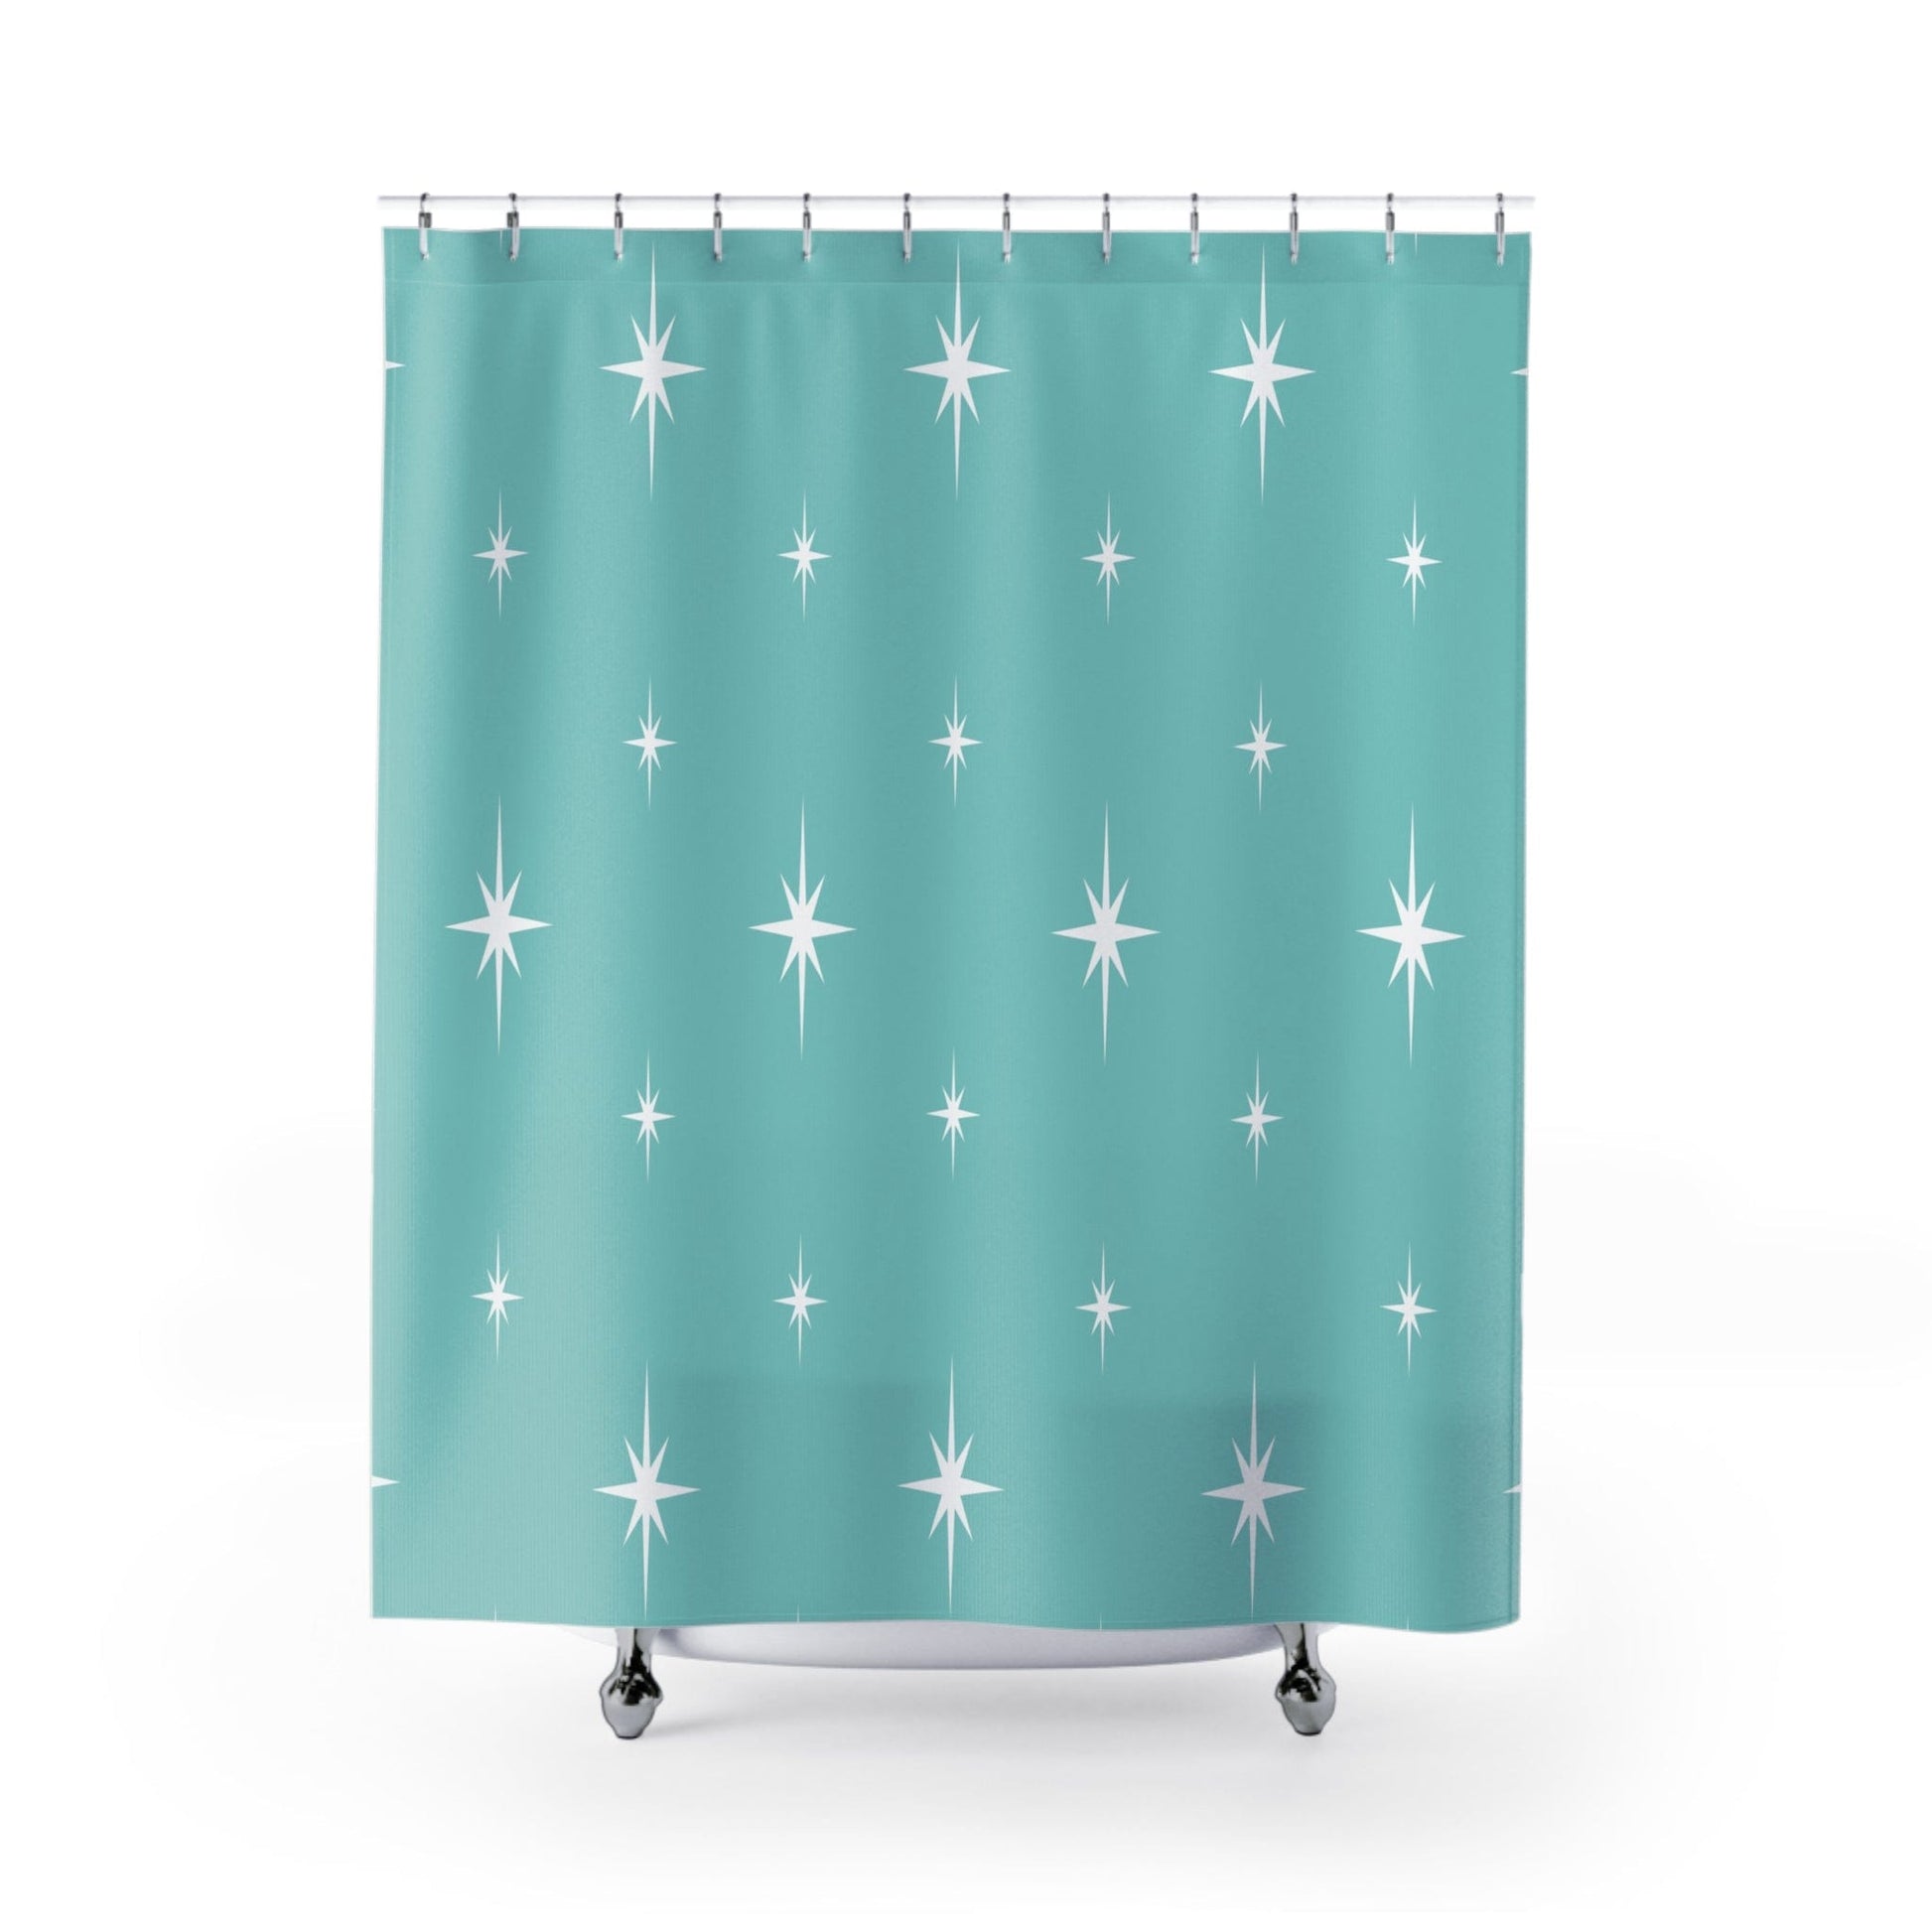 Kate McEnroe New York 50s Retro Mid Century Modern Atomic Starburst Shower Curtains in Vintage Turquoise and White Shower Curtains 70" x 90" S40-STB-BLU-7X9